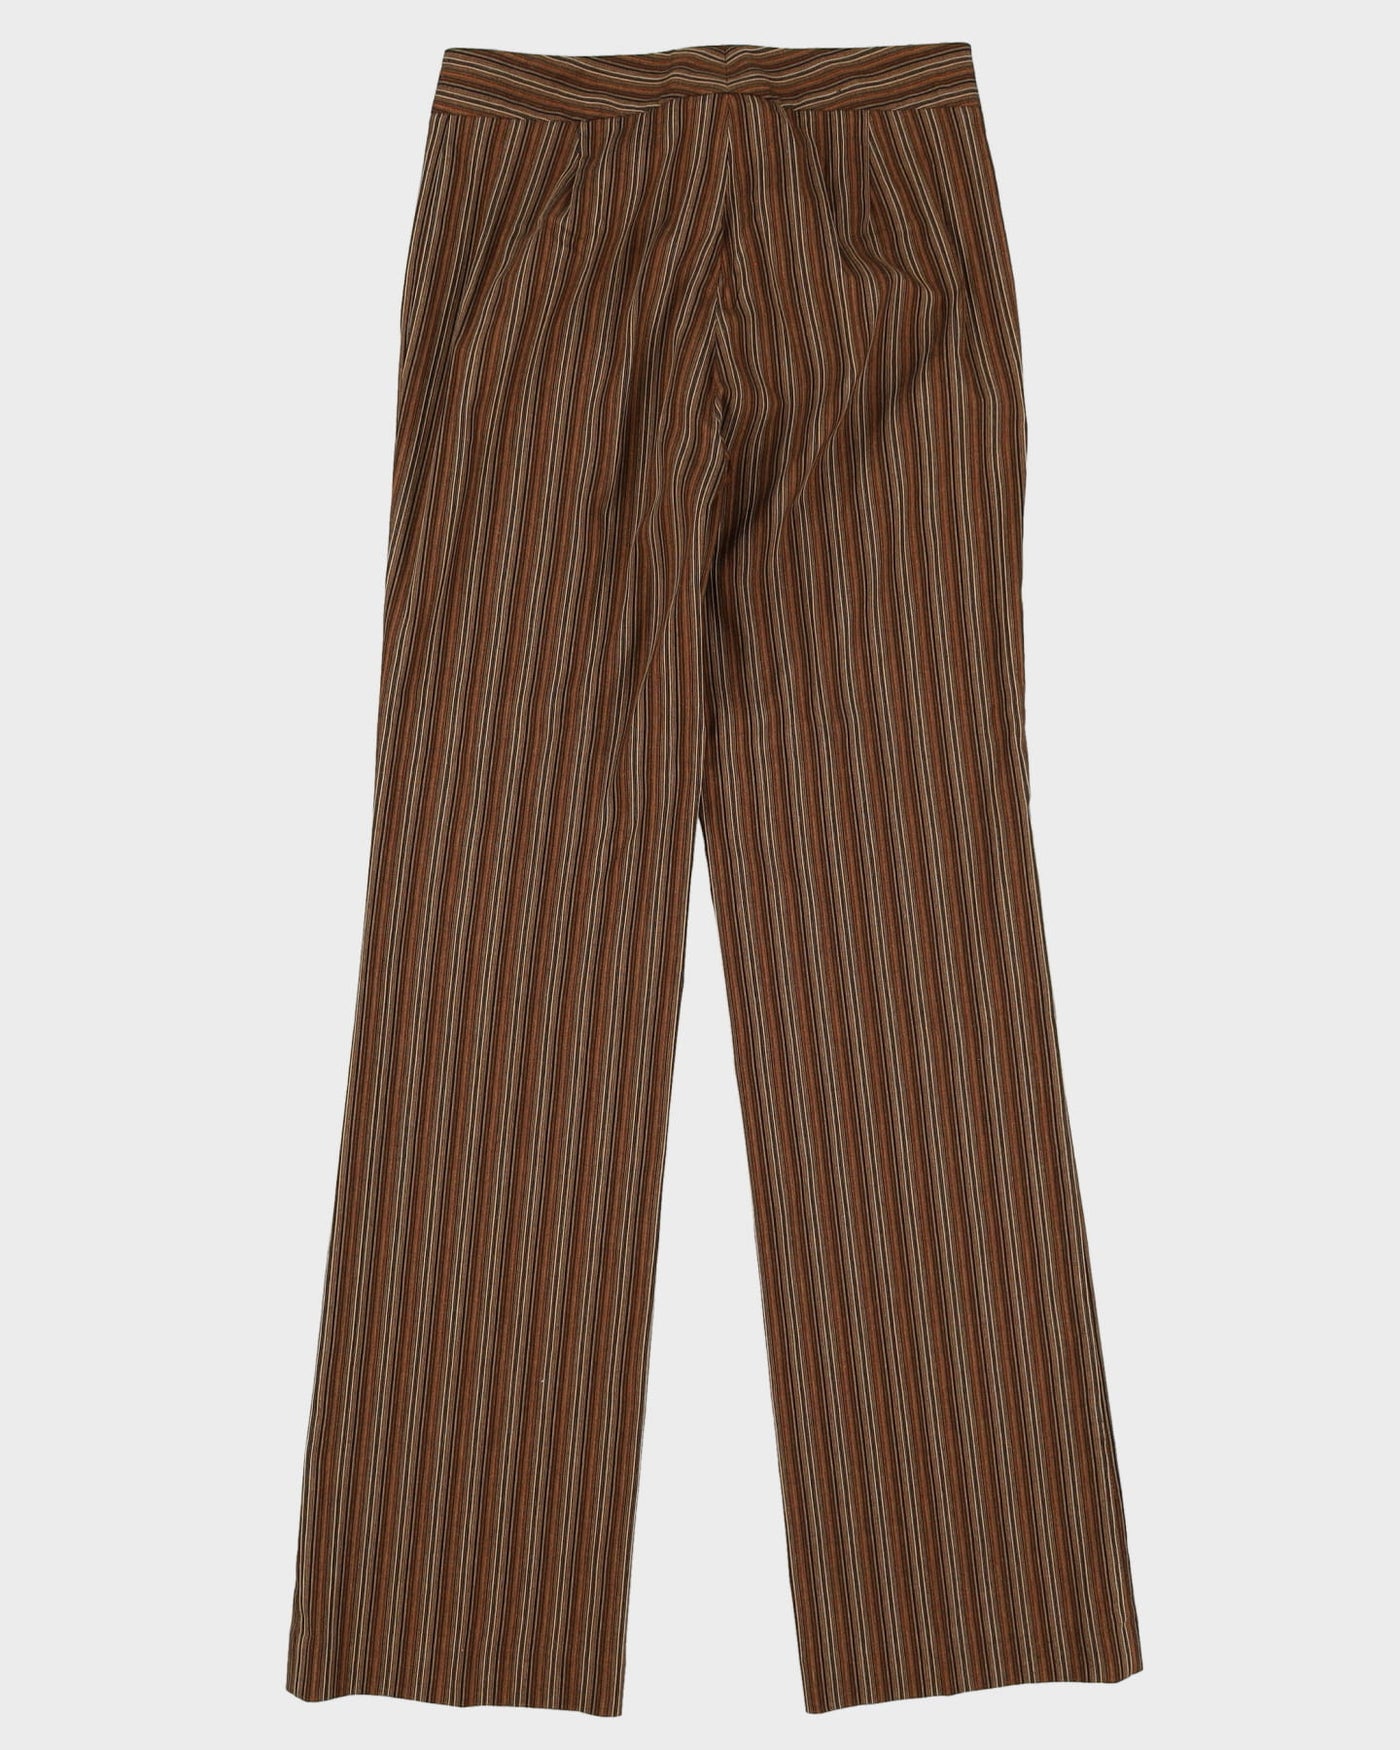 Brown Striped Two Piece Suit - S